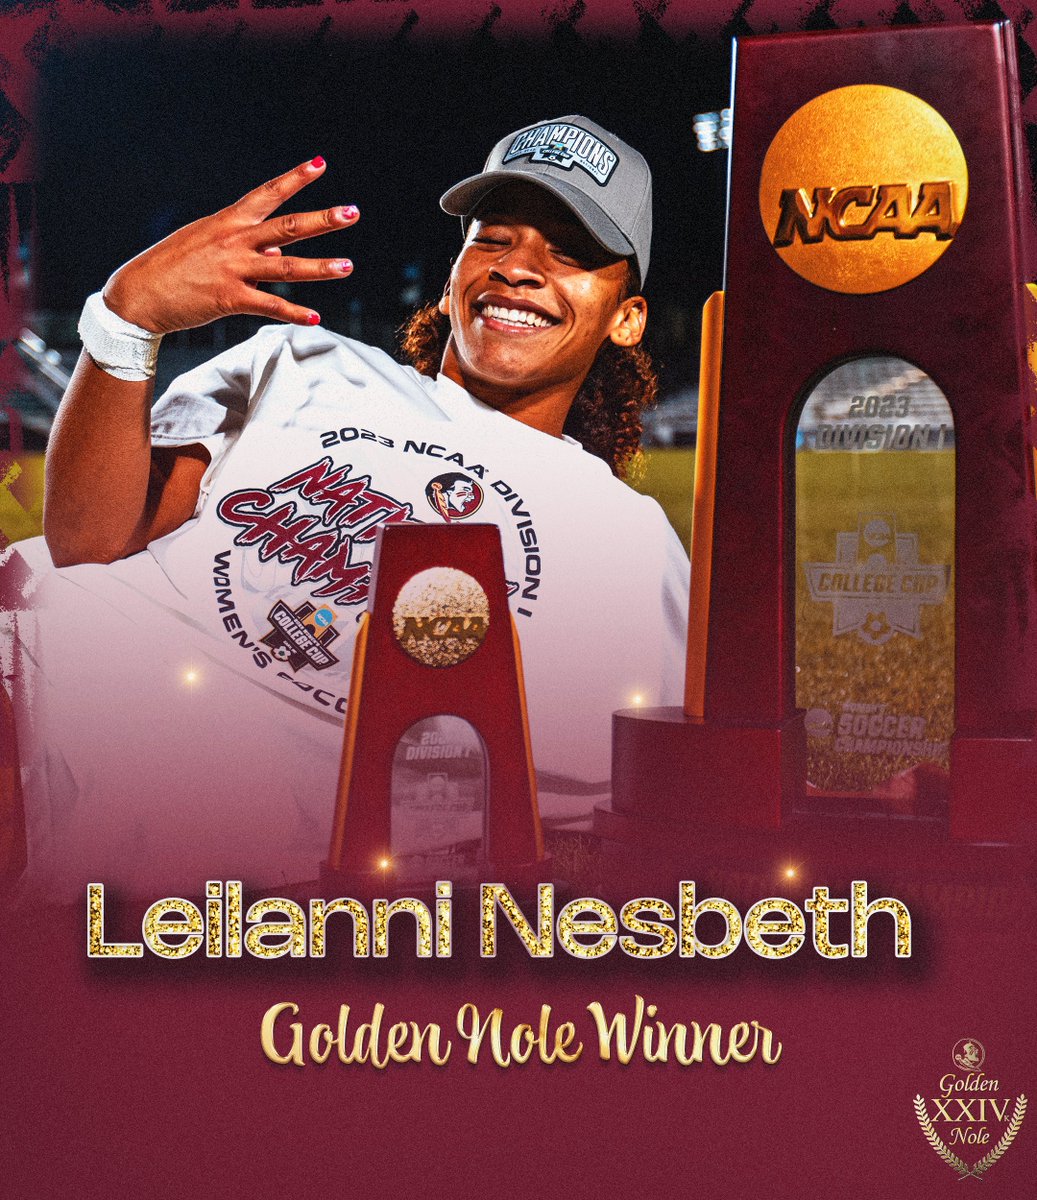 Congrats to Leilanni on being named a Golden Nole Winner tonight🍢 #ALL4ONE